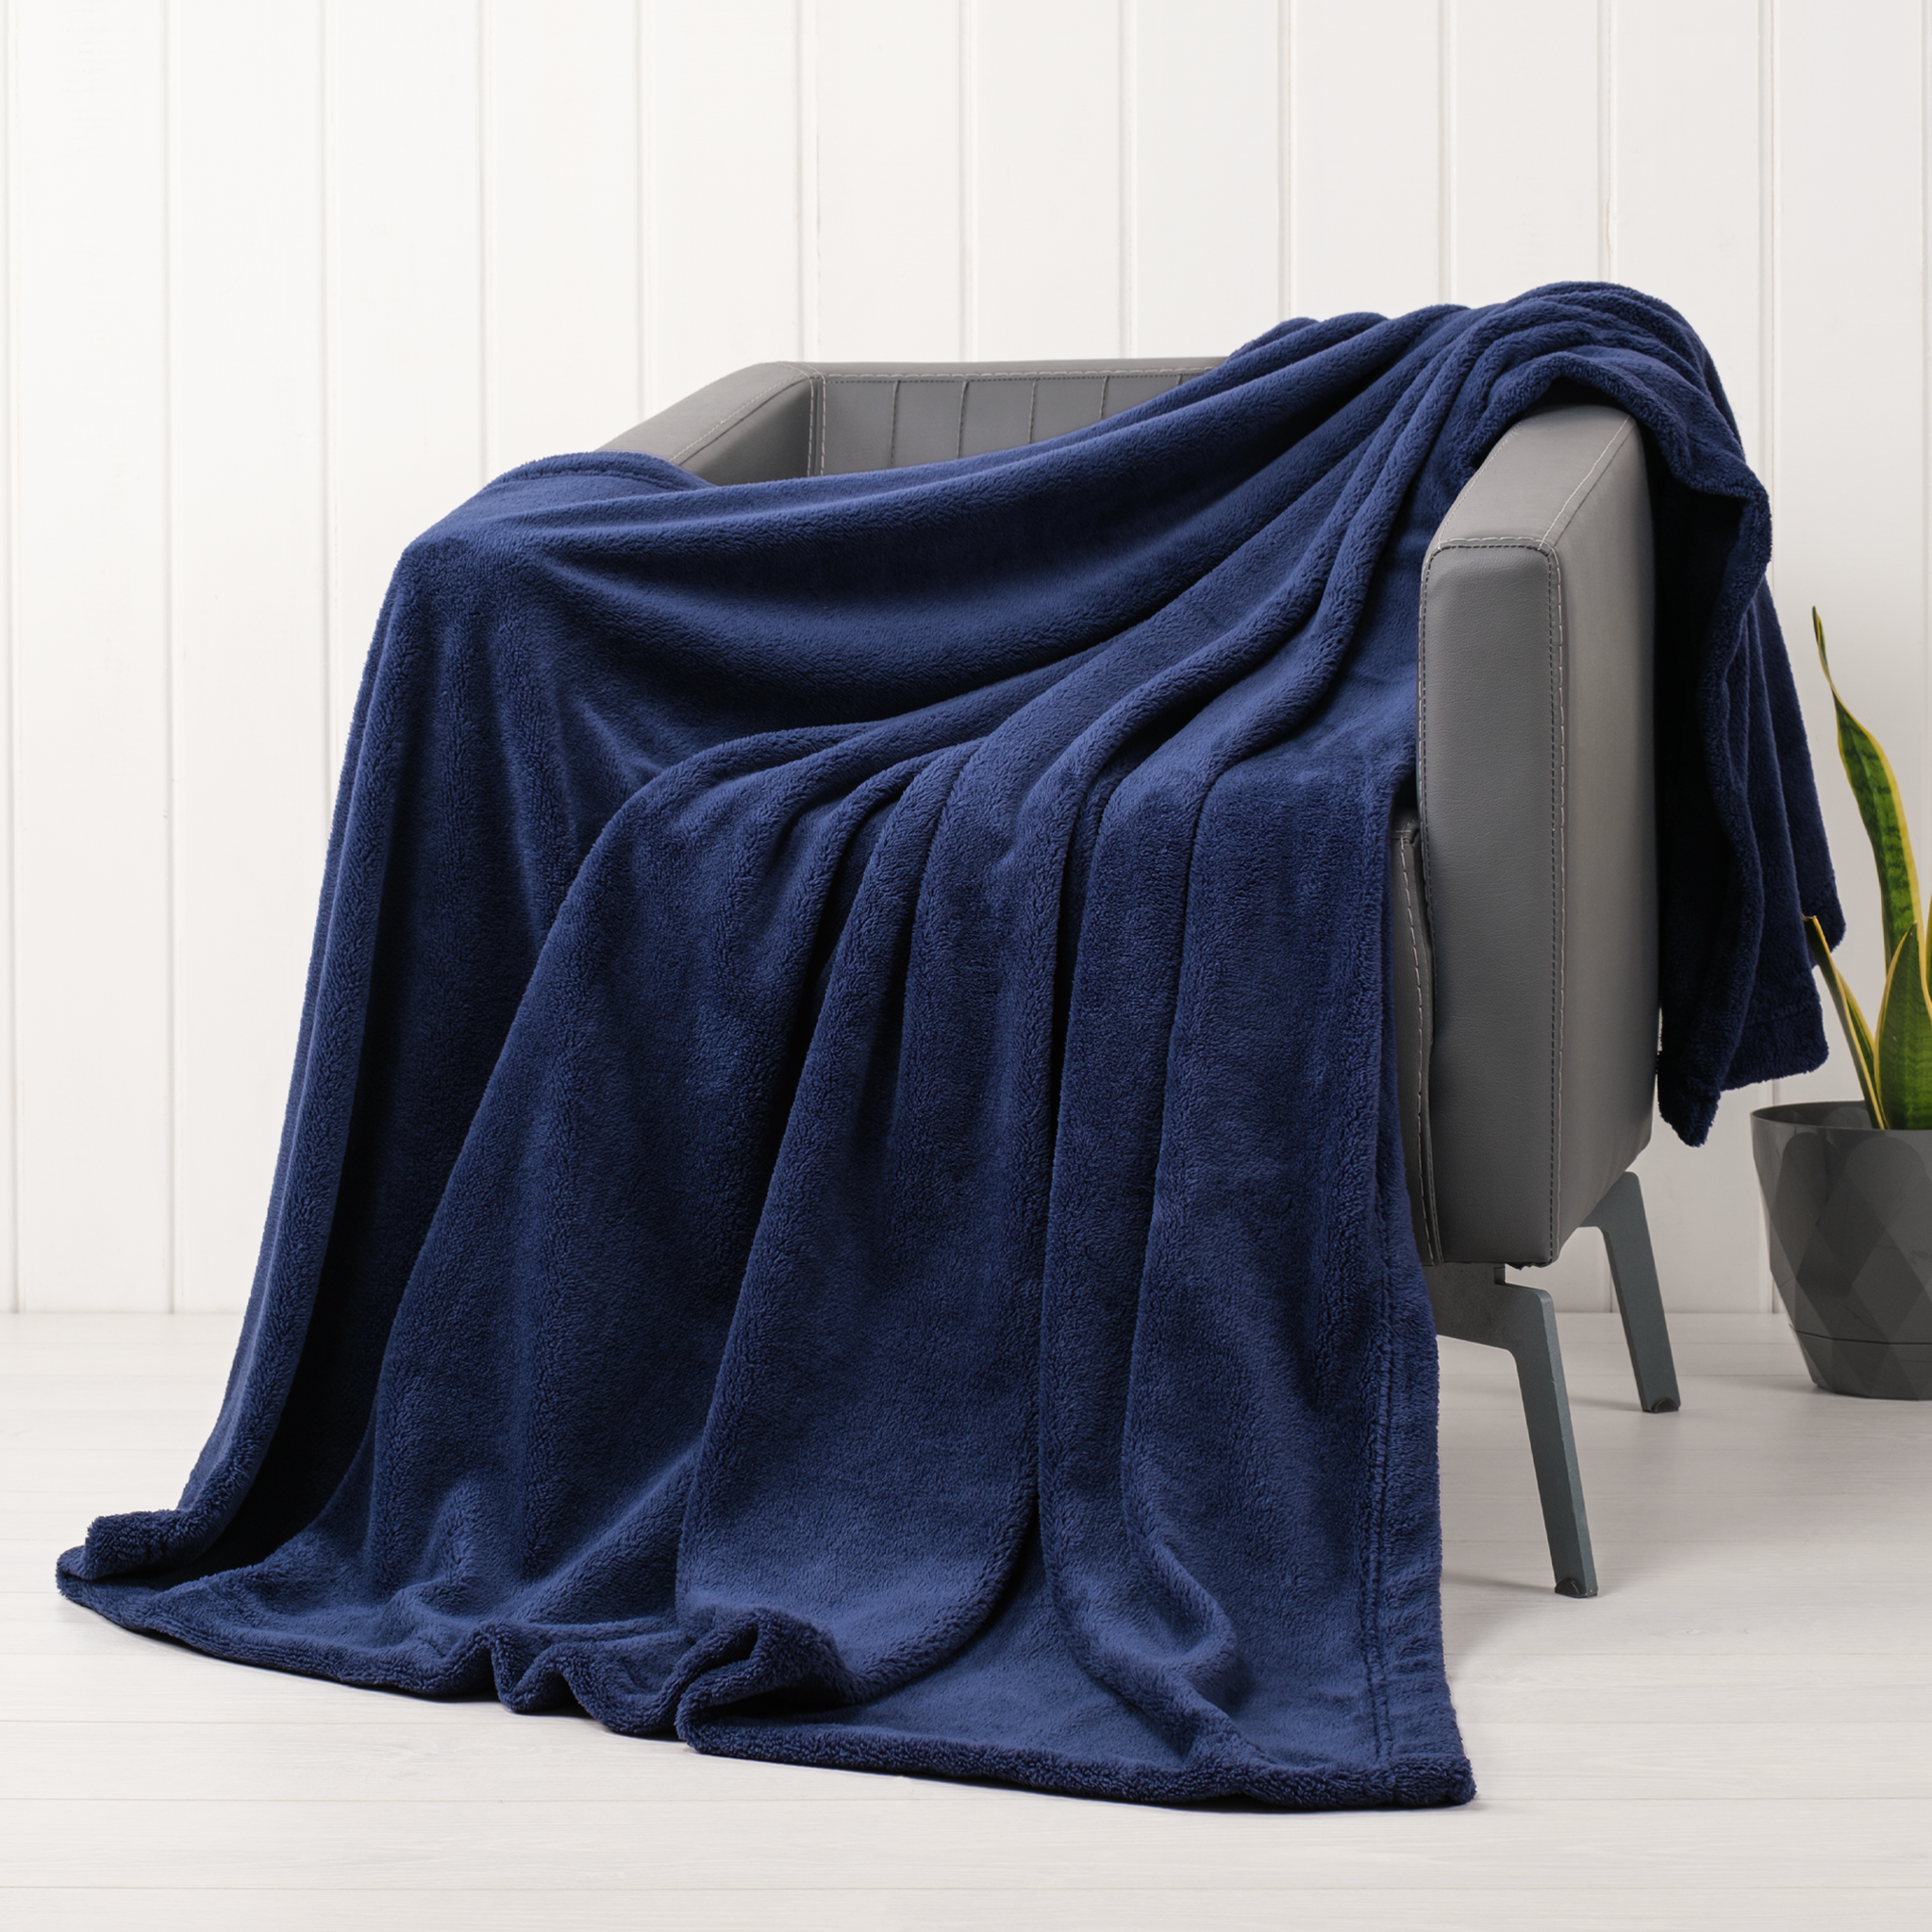 American Soft Linen - Bedding Fleece Blanket - Twin Size 60x80 inches - Navy-Blue - 1